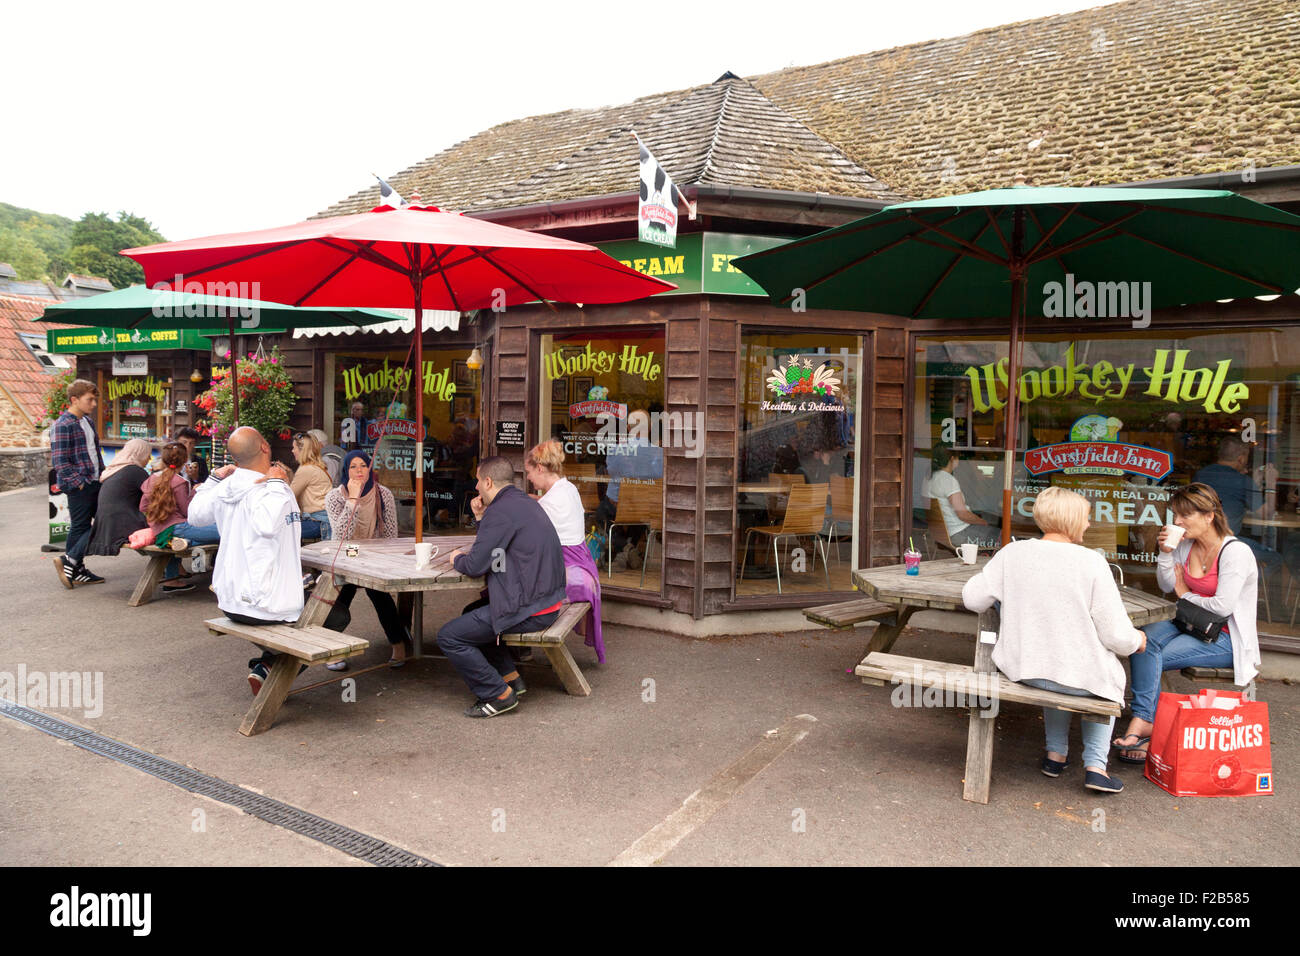 Tourists sitting at a cafe, Wookey Hole tourist attraction, Somerset England UK Stock Photo